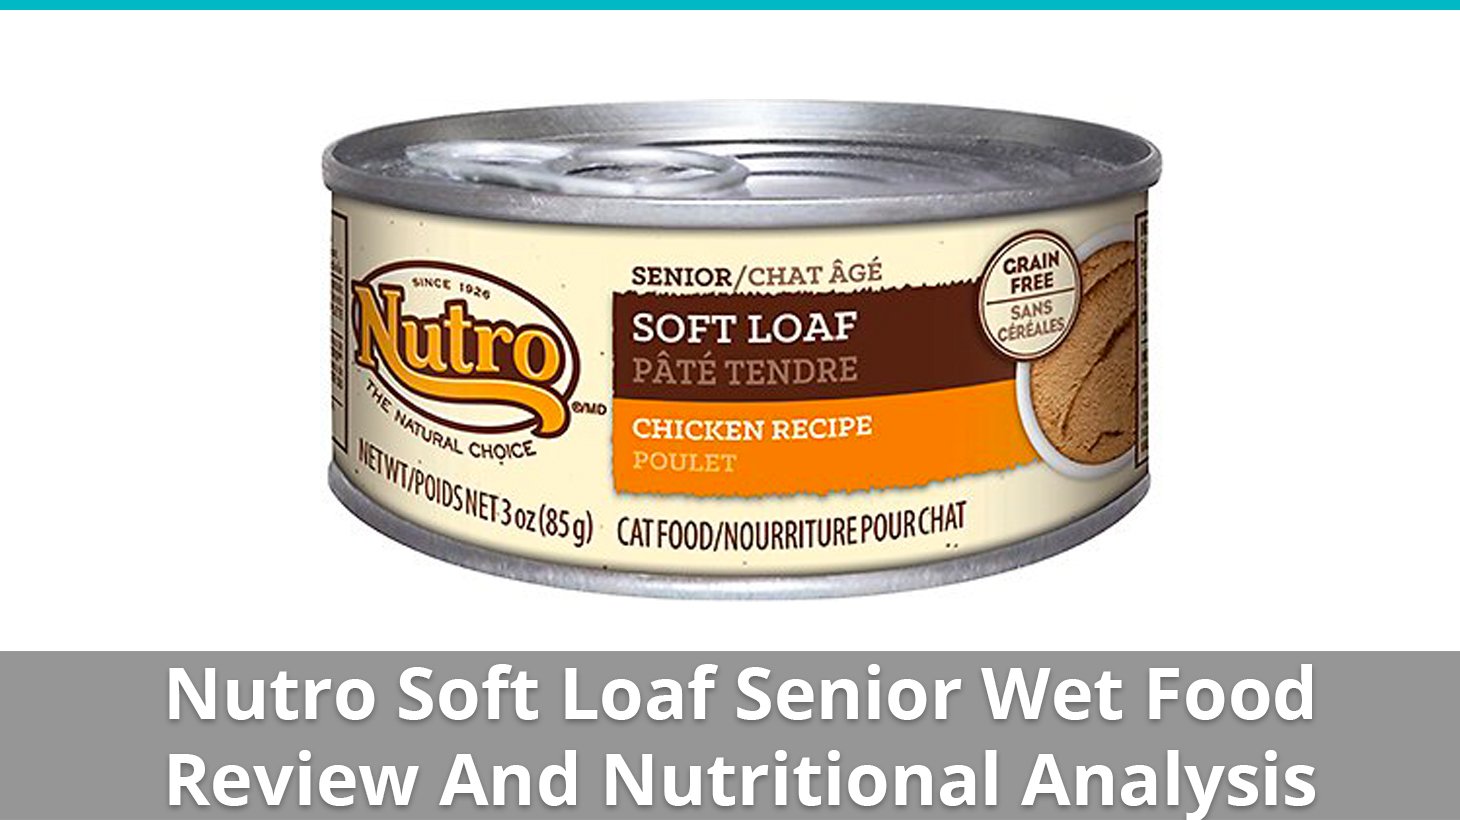 Nutro Soft Loaf Senior Cat Food (Wet) Review And Nutrition Analysis